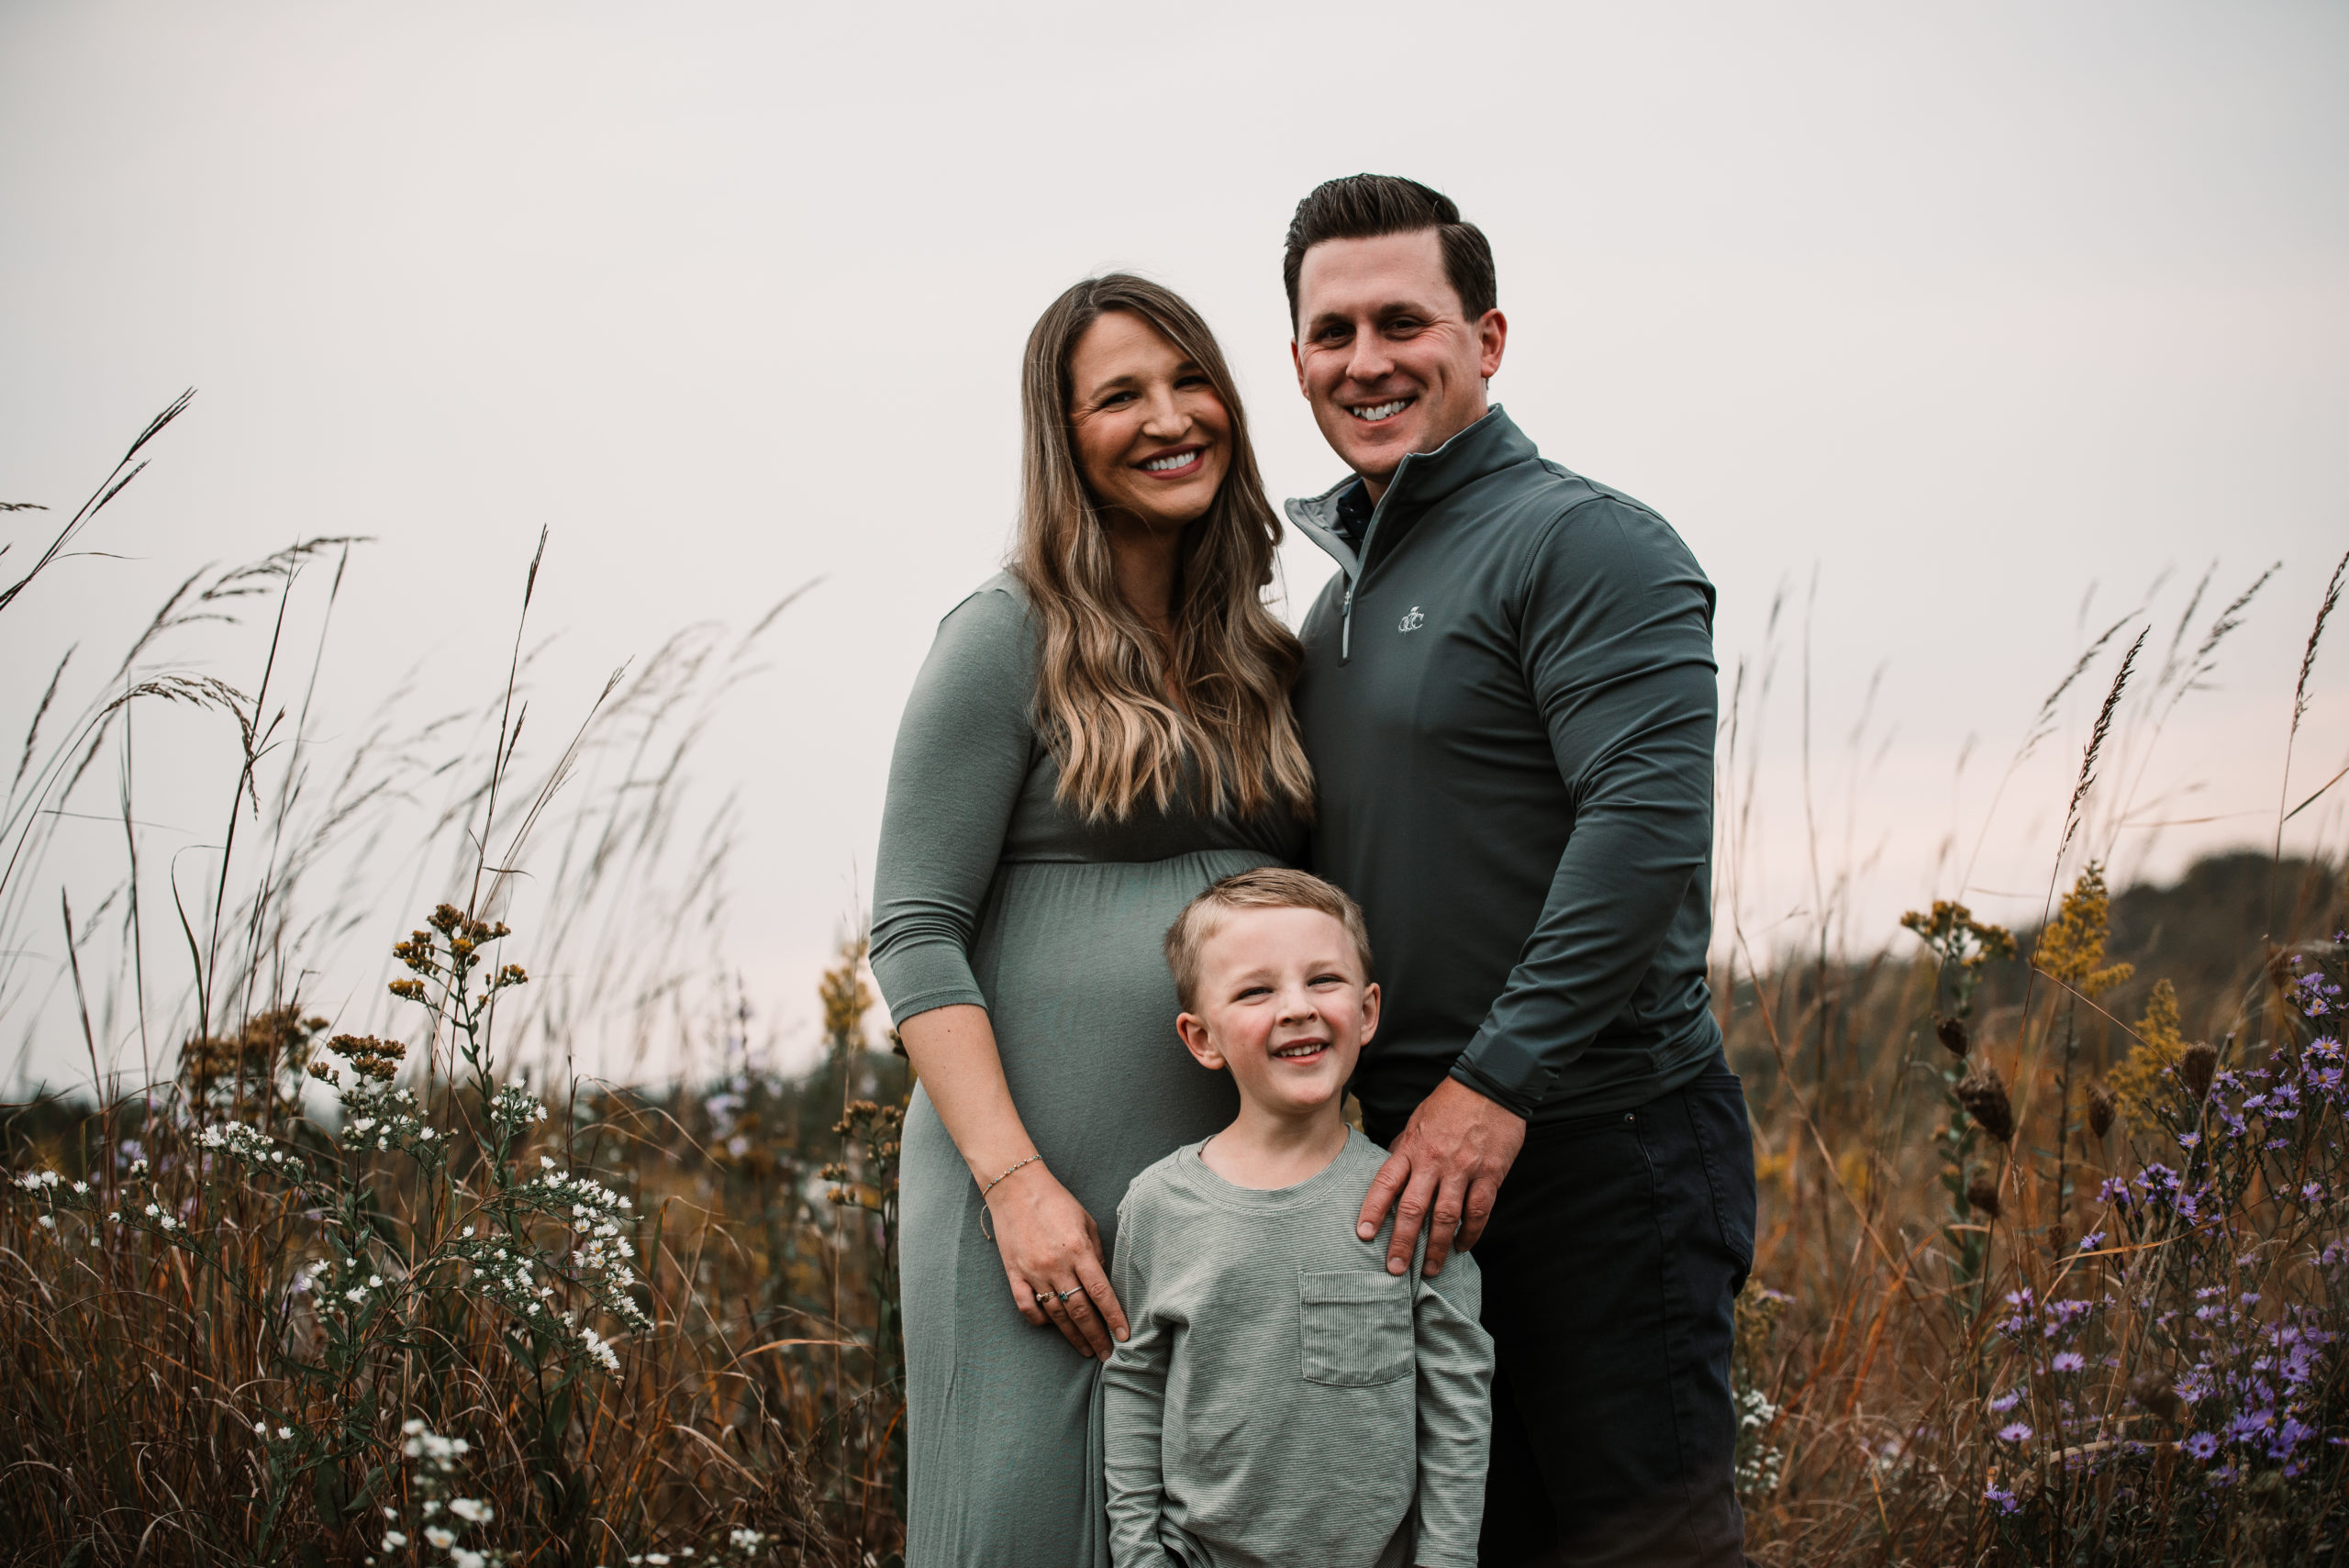 Midwest Wisconsin Family Maternity Session